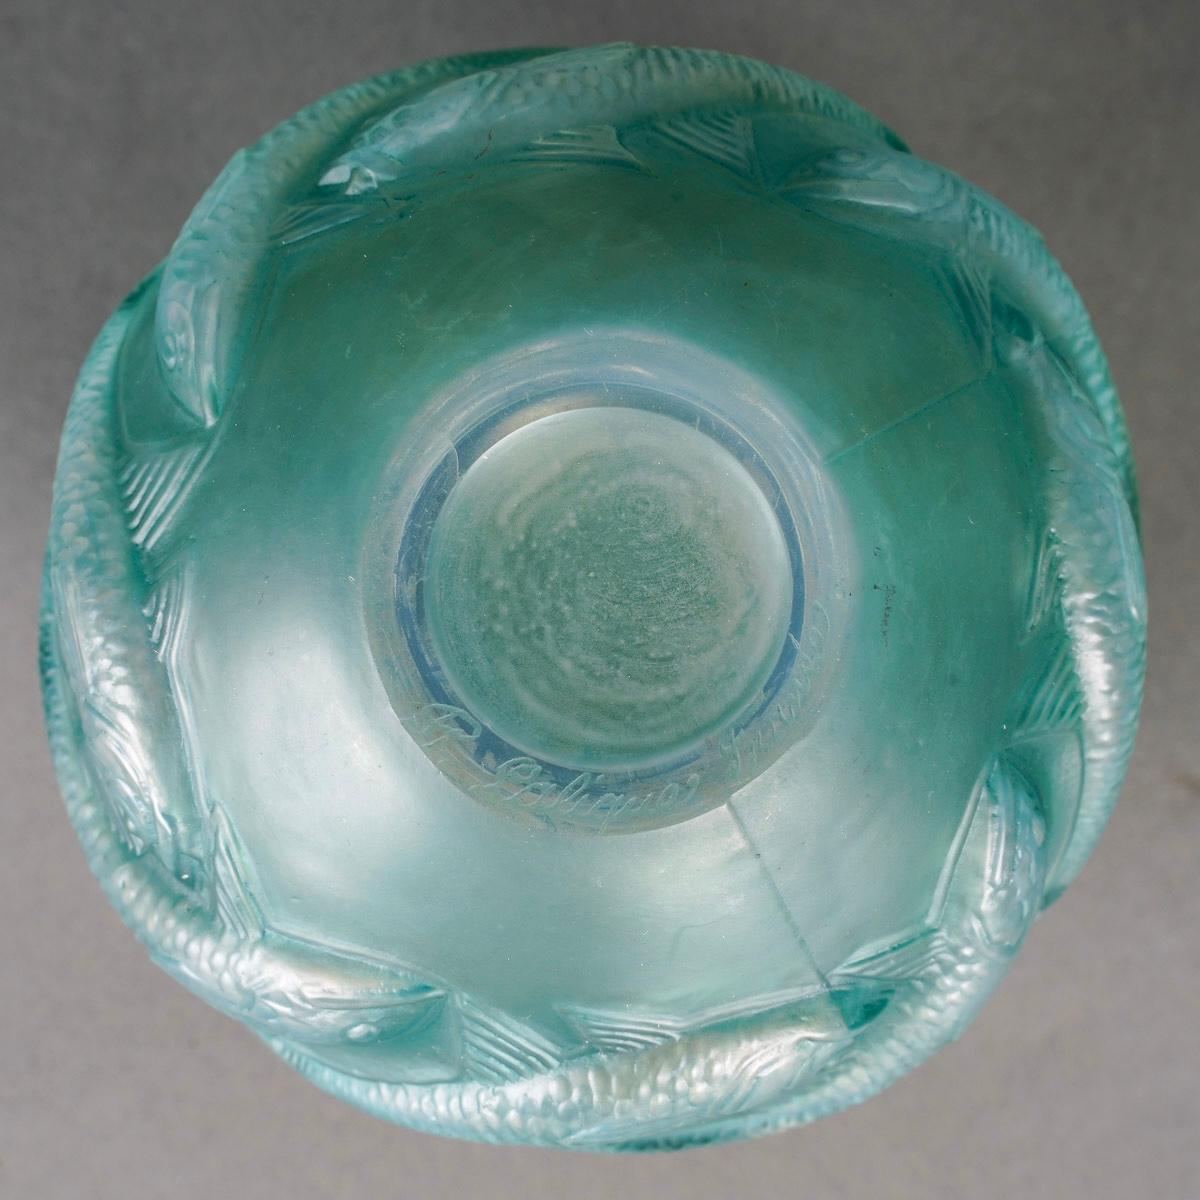 Molded 1927 René Lalique Vase Oleron Cased Opalescent Glass with Green Patina